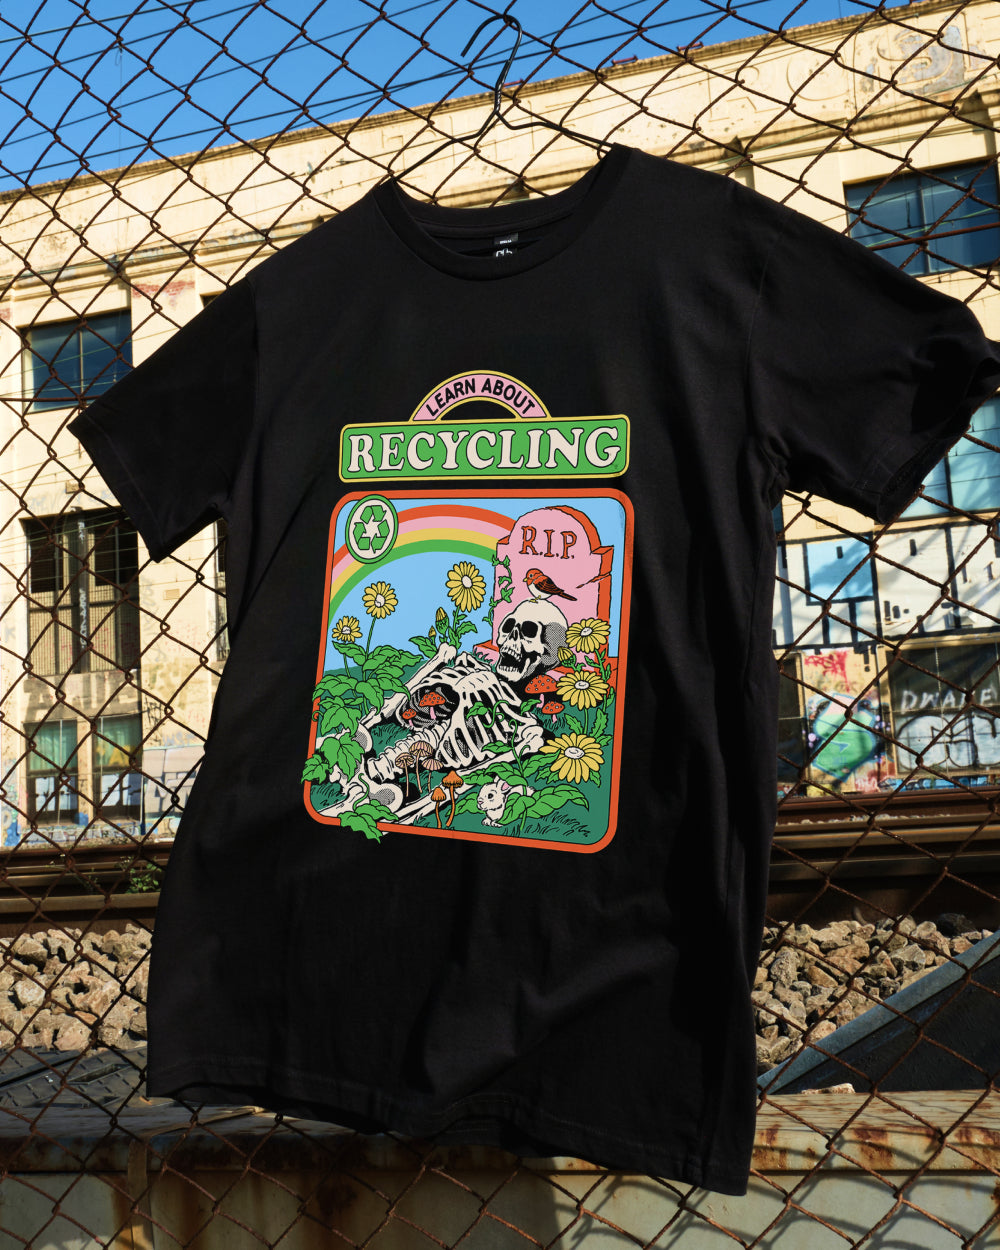 Learn About Recycling T-Shirt Australia Online